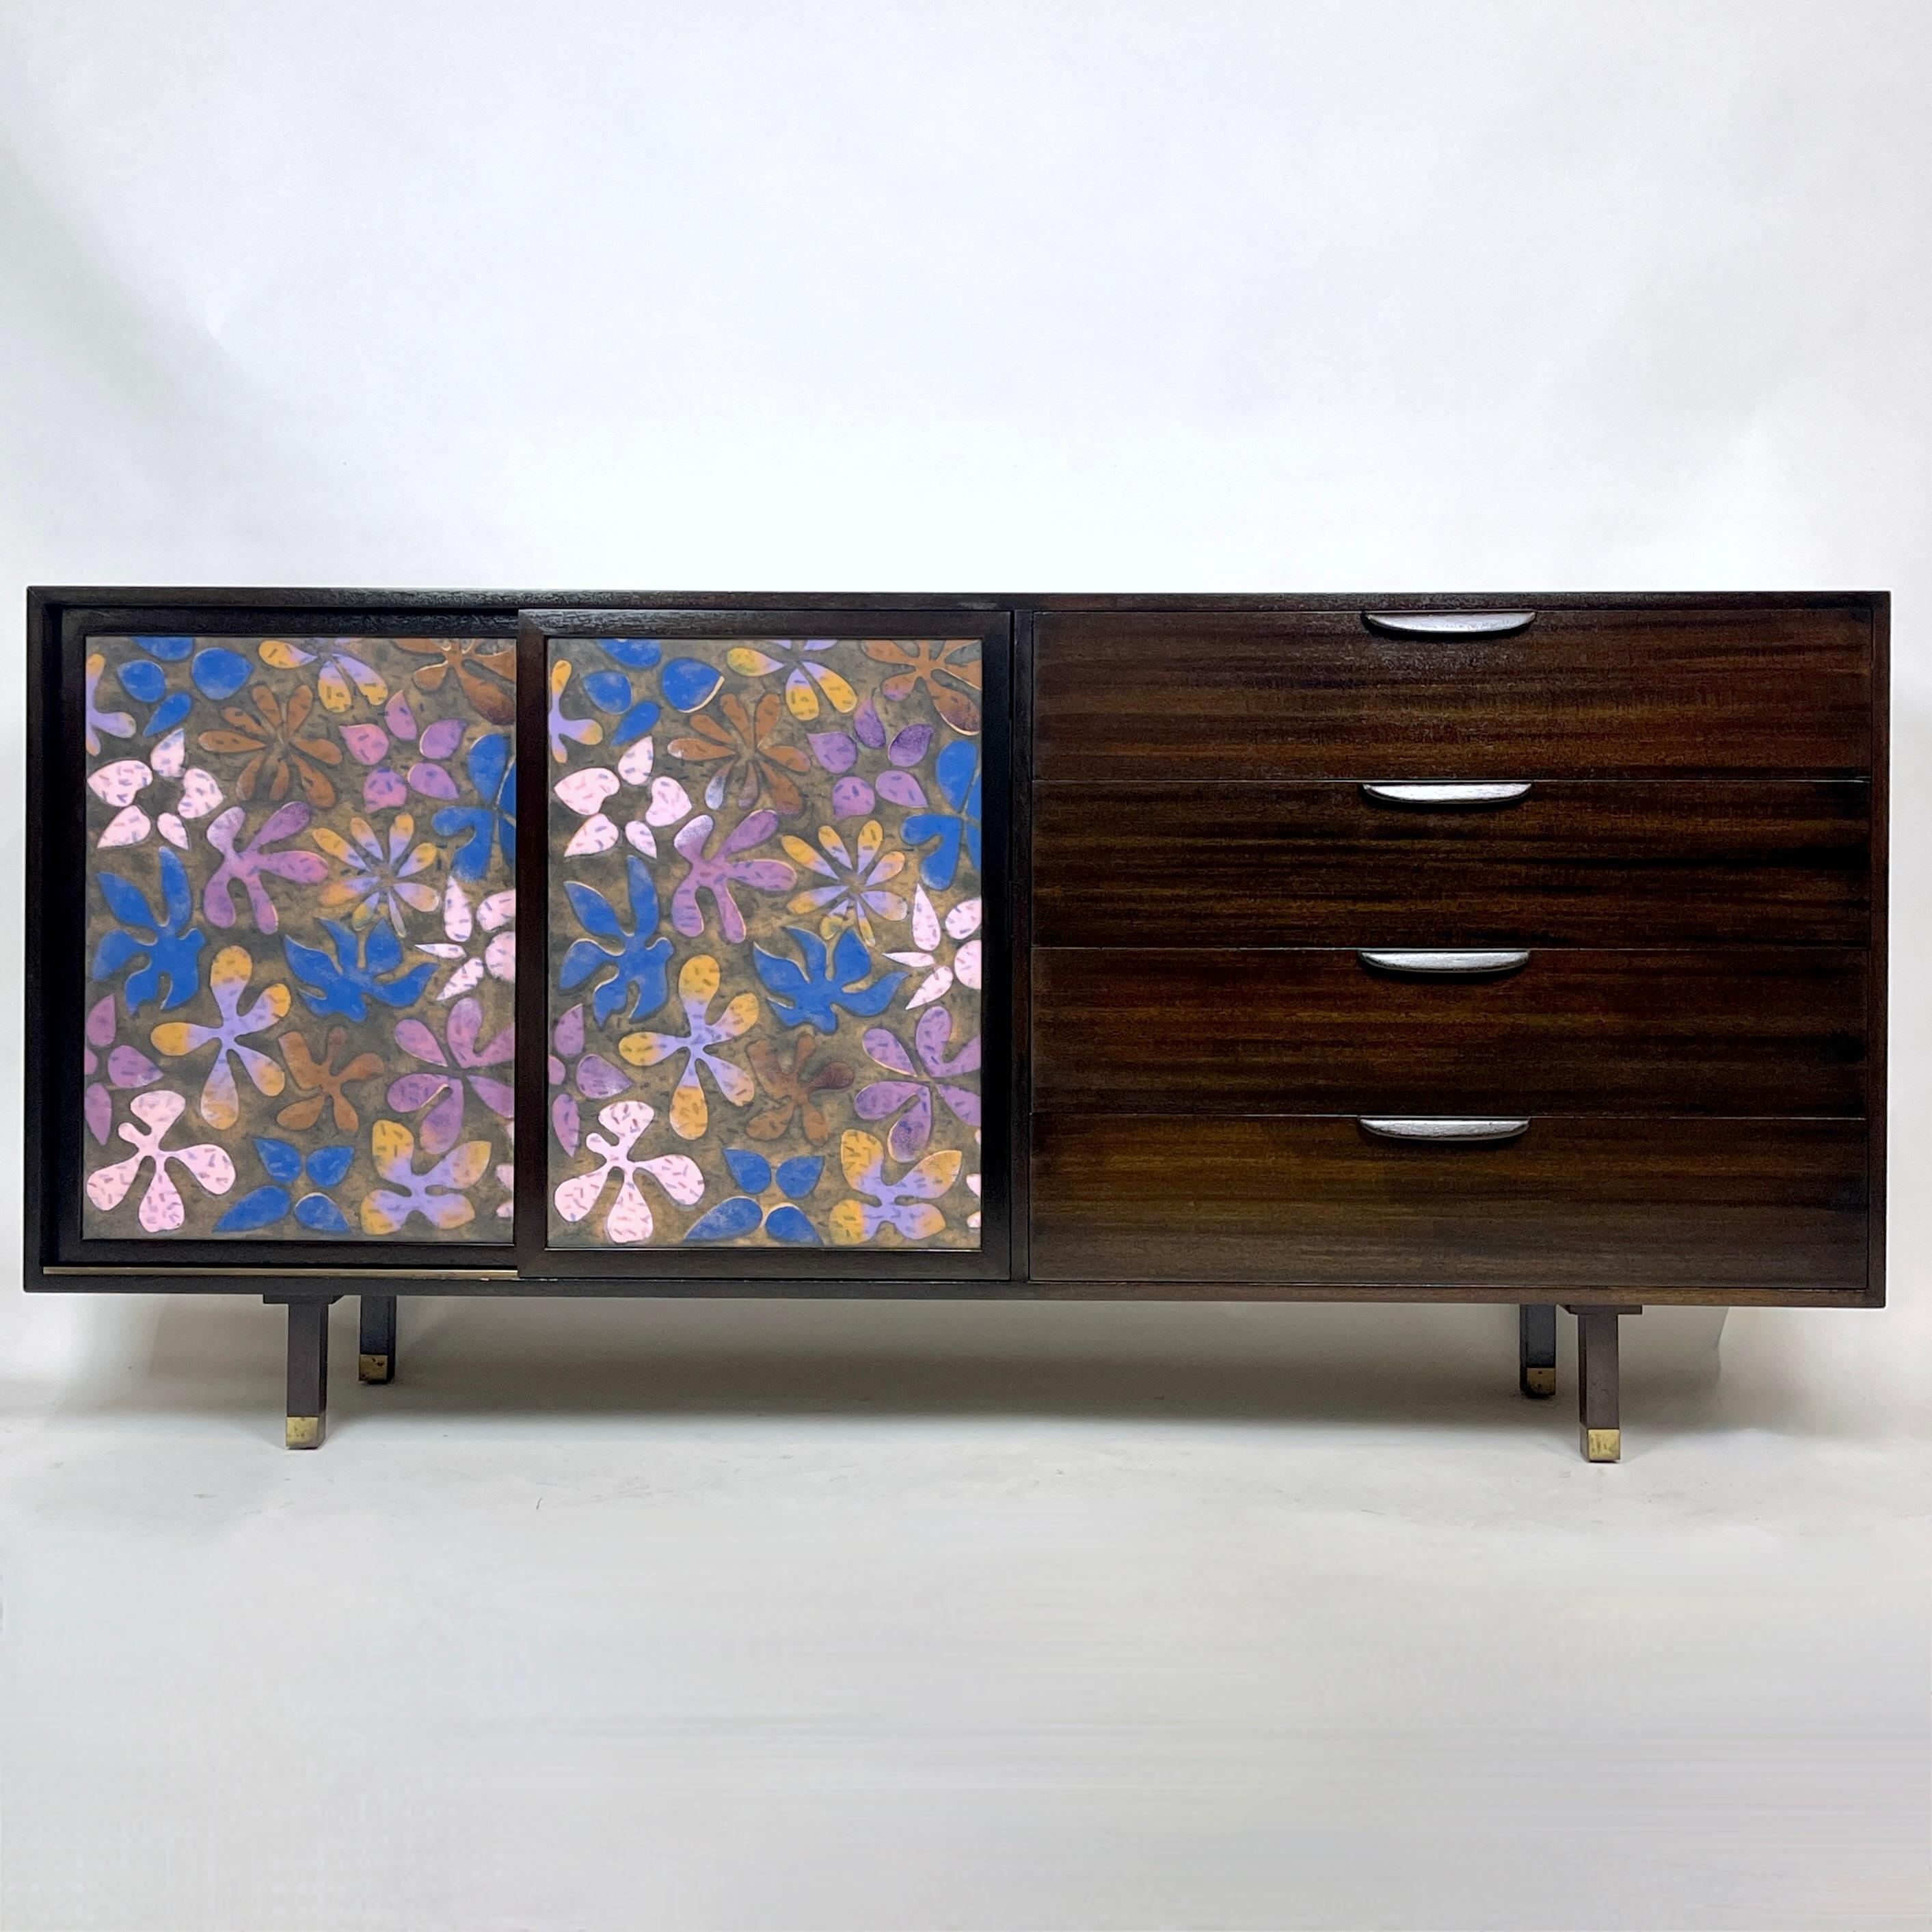 Exquisite & Rare Harvey Probber Credenza Dresser w. Arpad Rasti Enameled Doors  In Good Condition For Sale In Hudson, NY